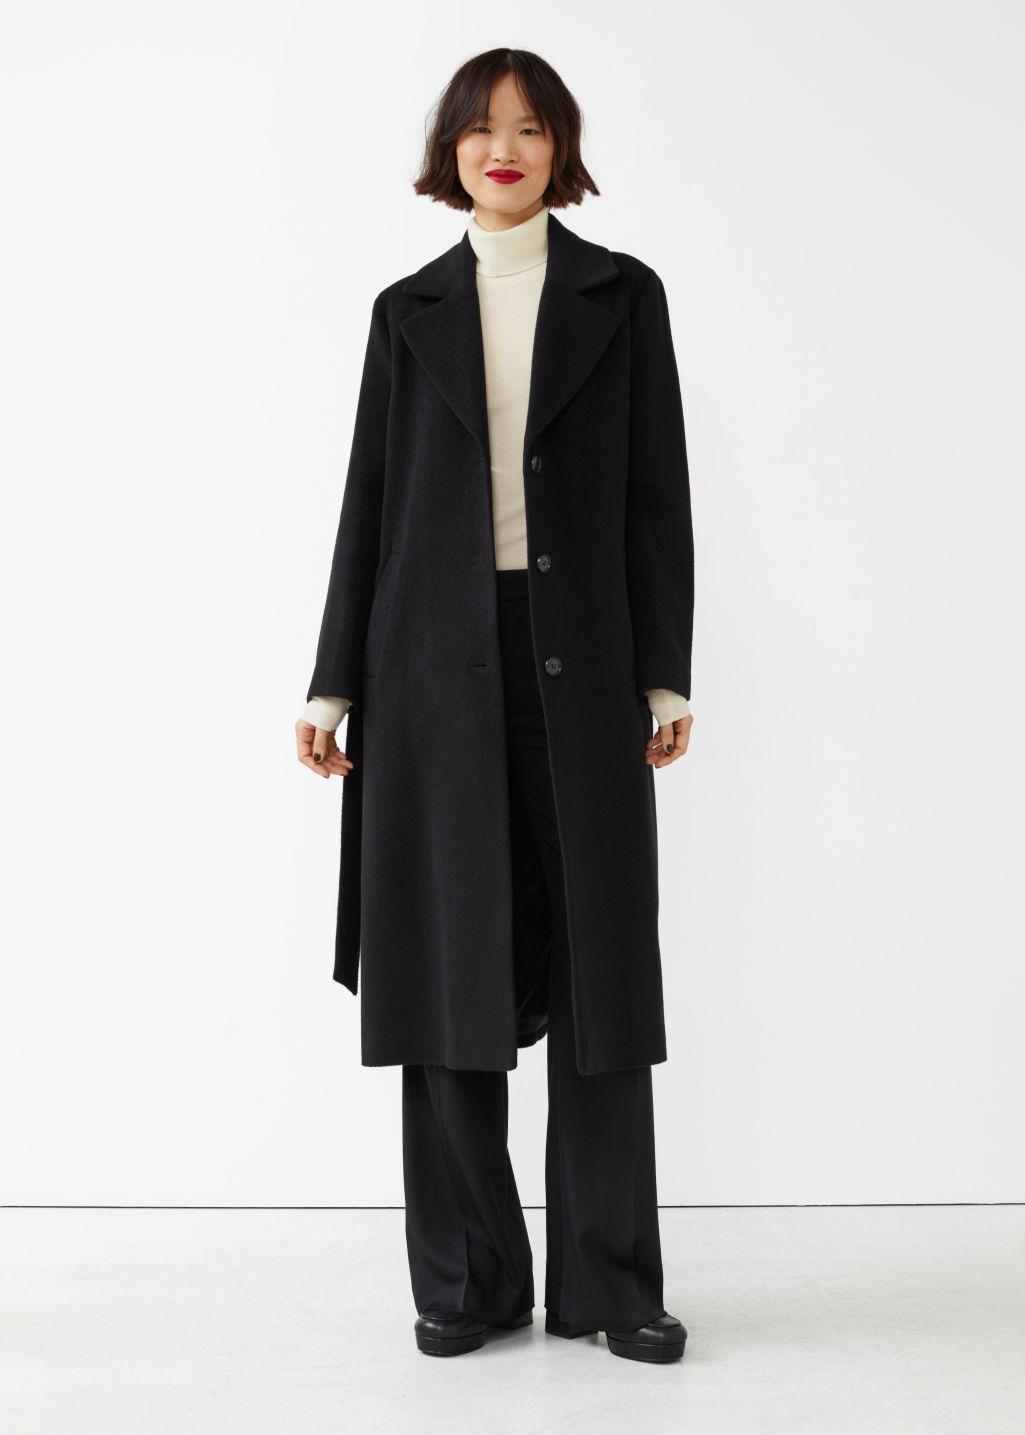 & Other Stories Relaxed Alpaca Blend Coat in Black | Lyst